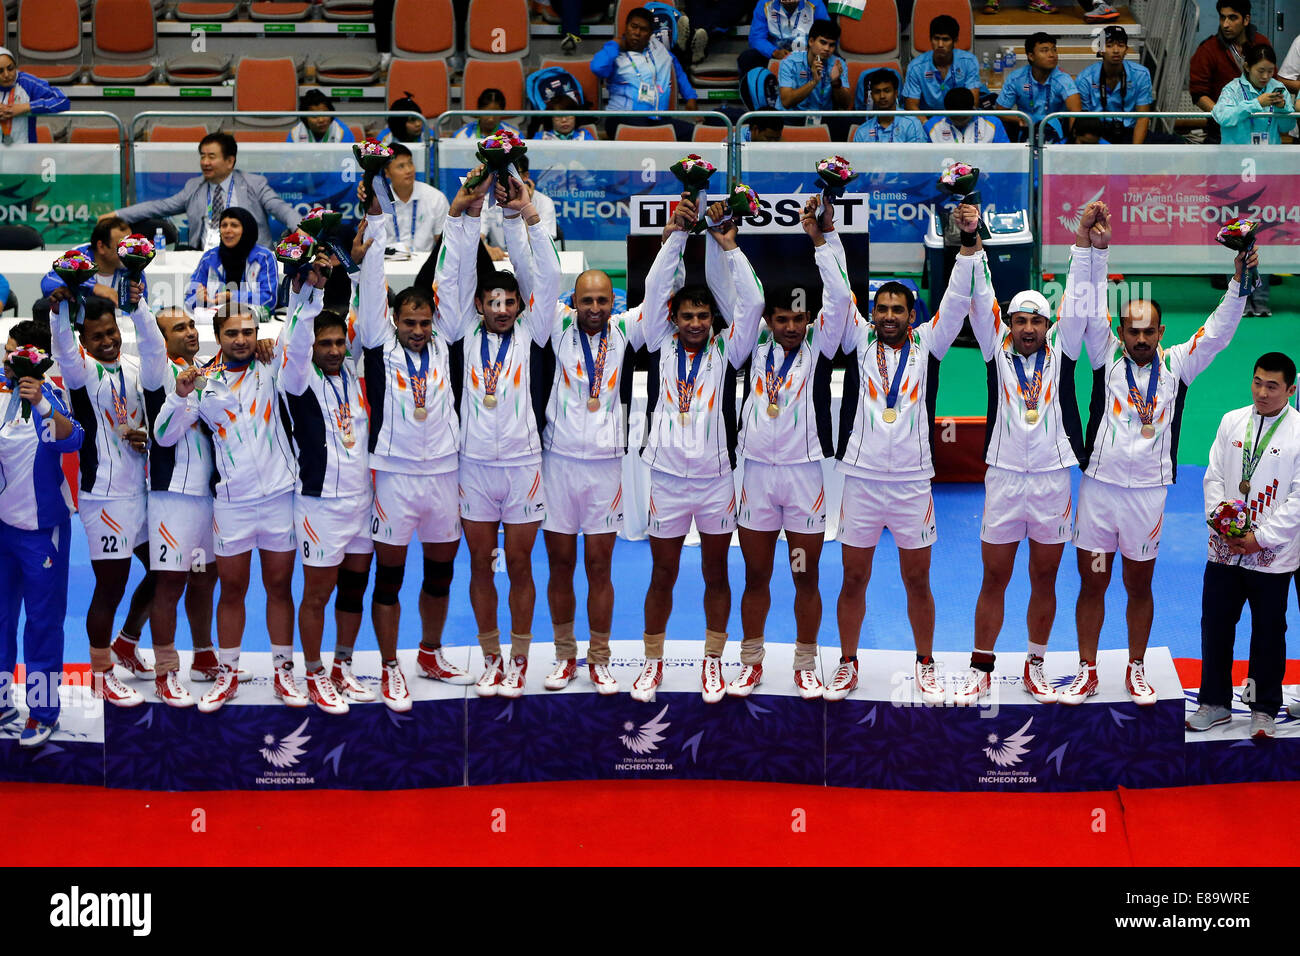 (141003) -- INCHEON, Oct. 3, 2014 (Xinhua) -- Gold medalists athletes of India pose on the podium during the awarding ceremony of the men's team match of kabaddi at the 17th Asian Games in Incheon, South Korea, Oct. 3, 2014. (Xinhua/Shen Bohan)(lz) Stock Photo